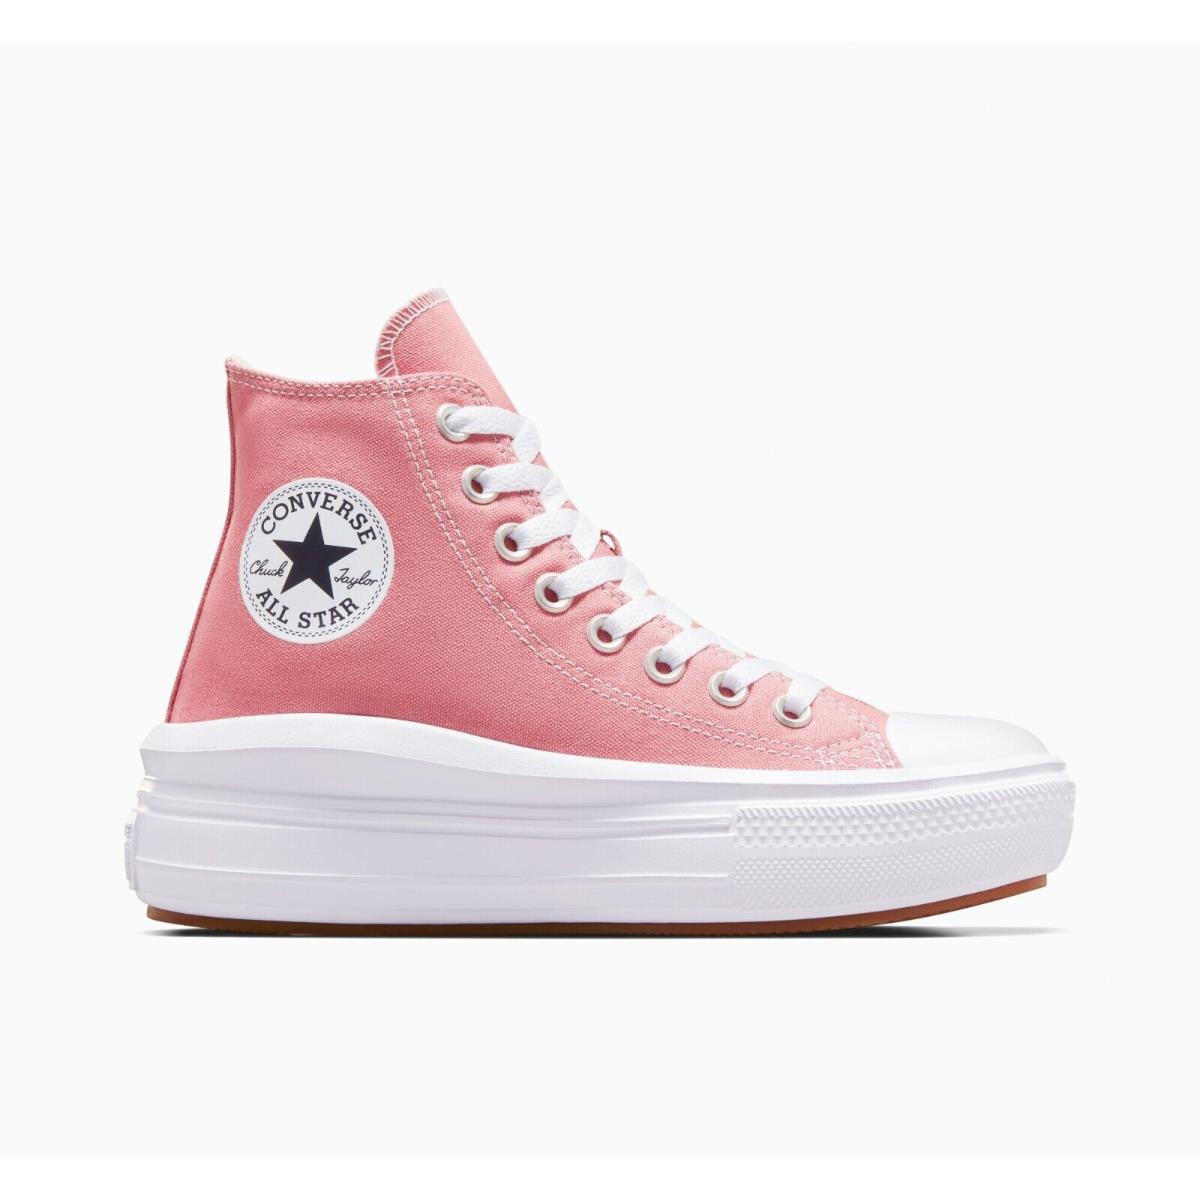 Converse Women`s Chuck Taylor All Star Move Platform Sneaker Canvas Upper Shoes Ritual Rose/White/White